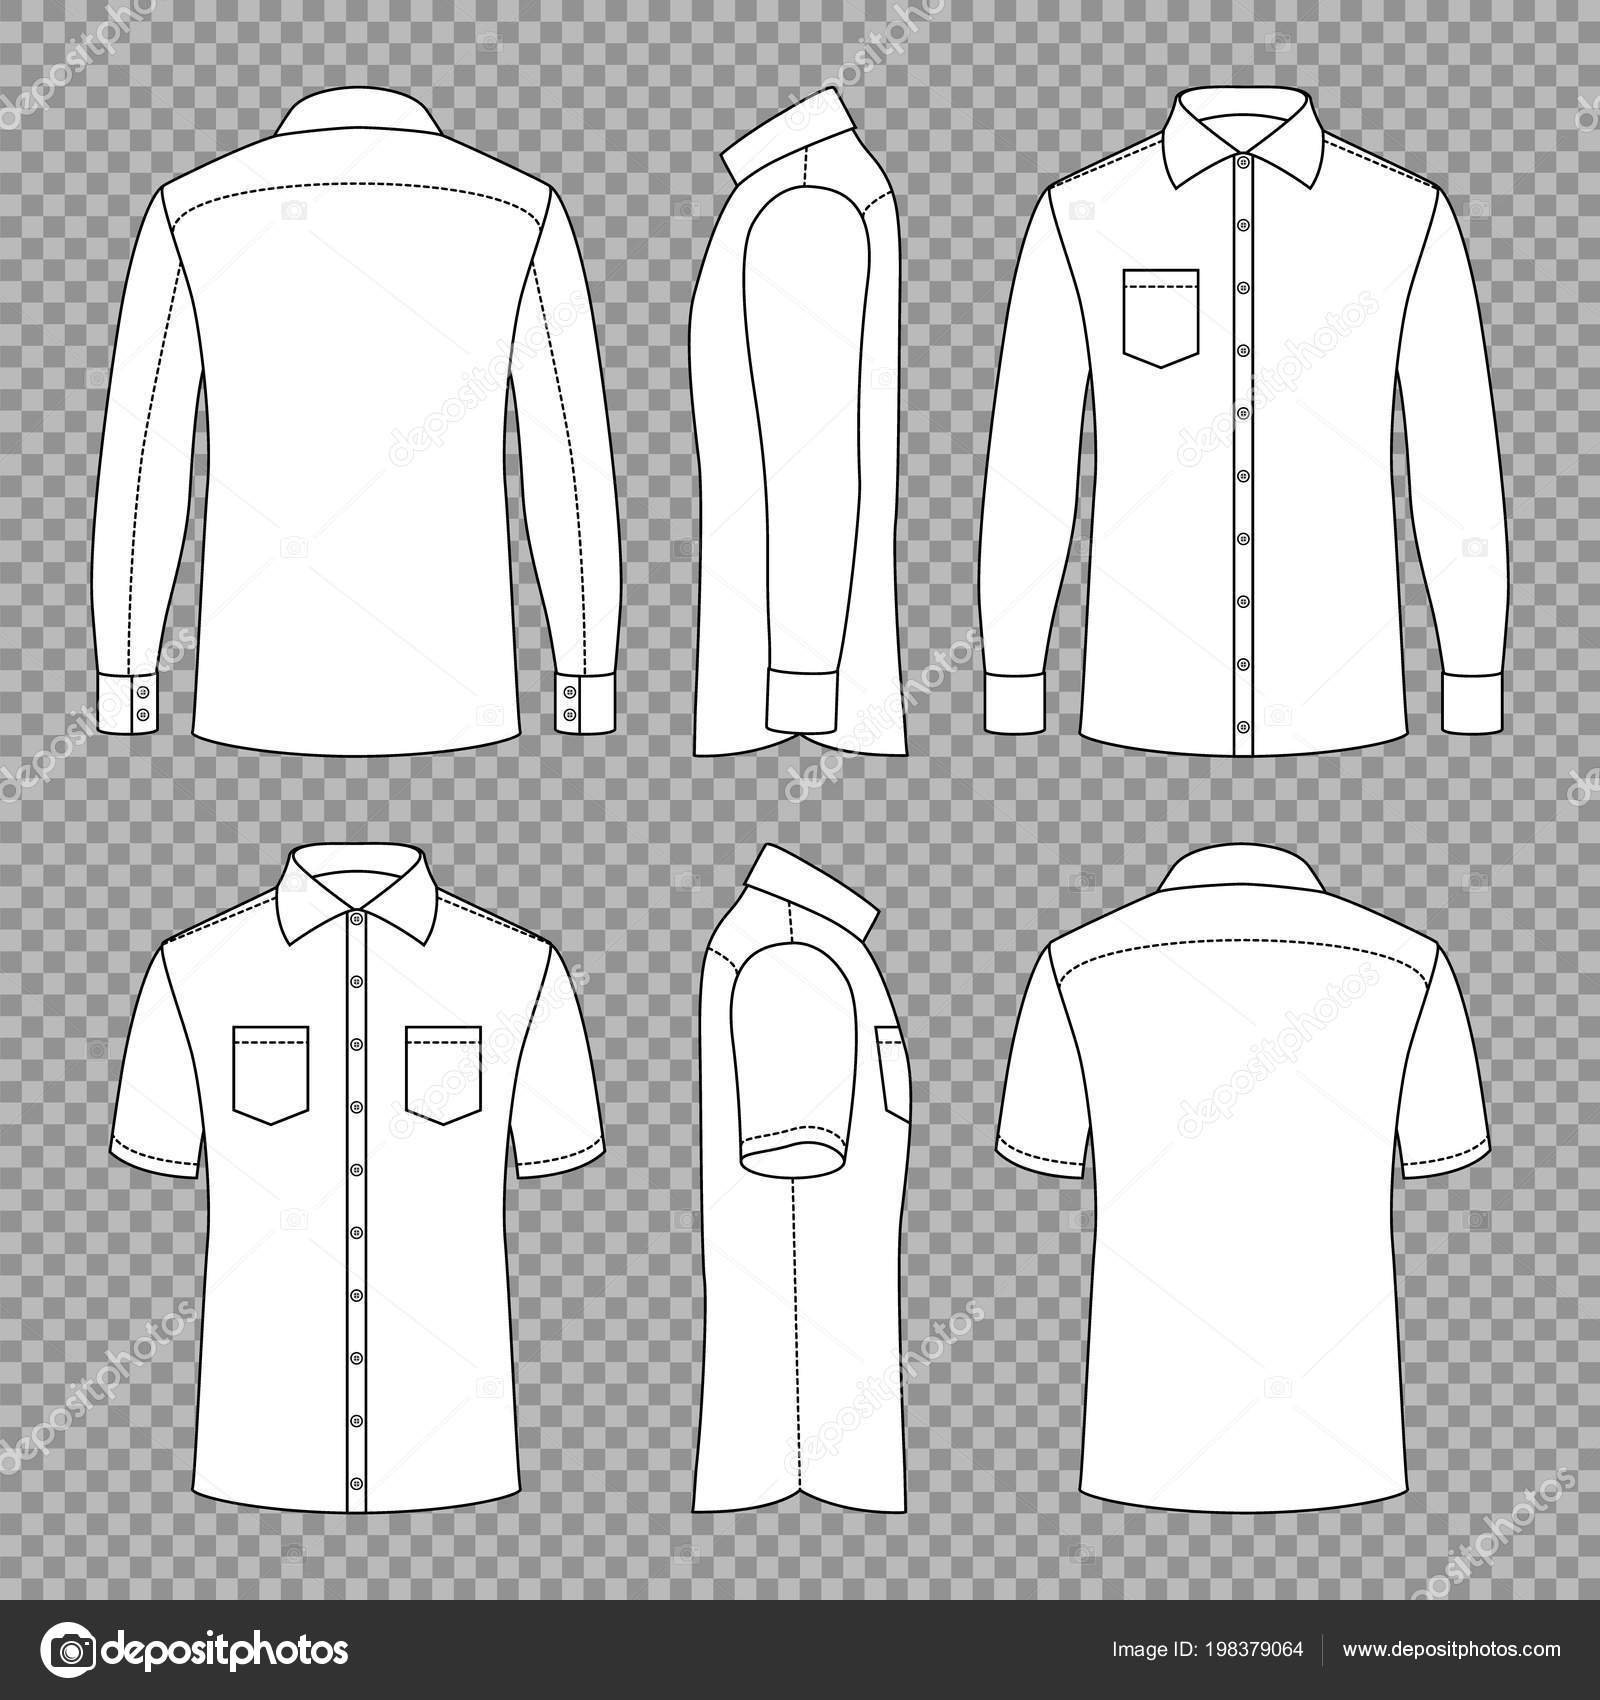 3302+ Outline Long Sleeve Shirt Vector Yellow Images Object Mockups ...